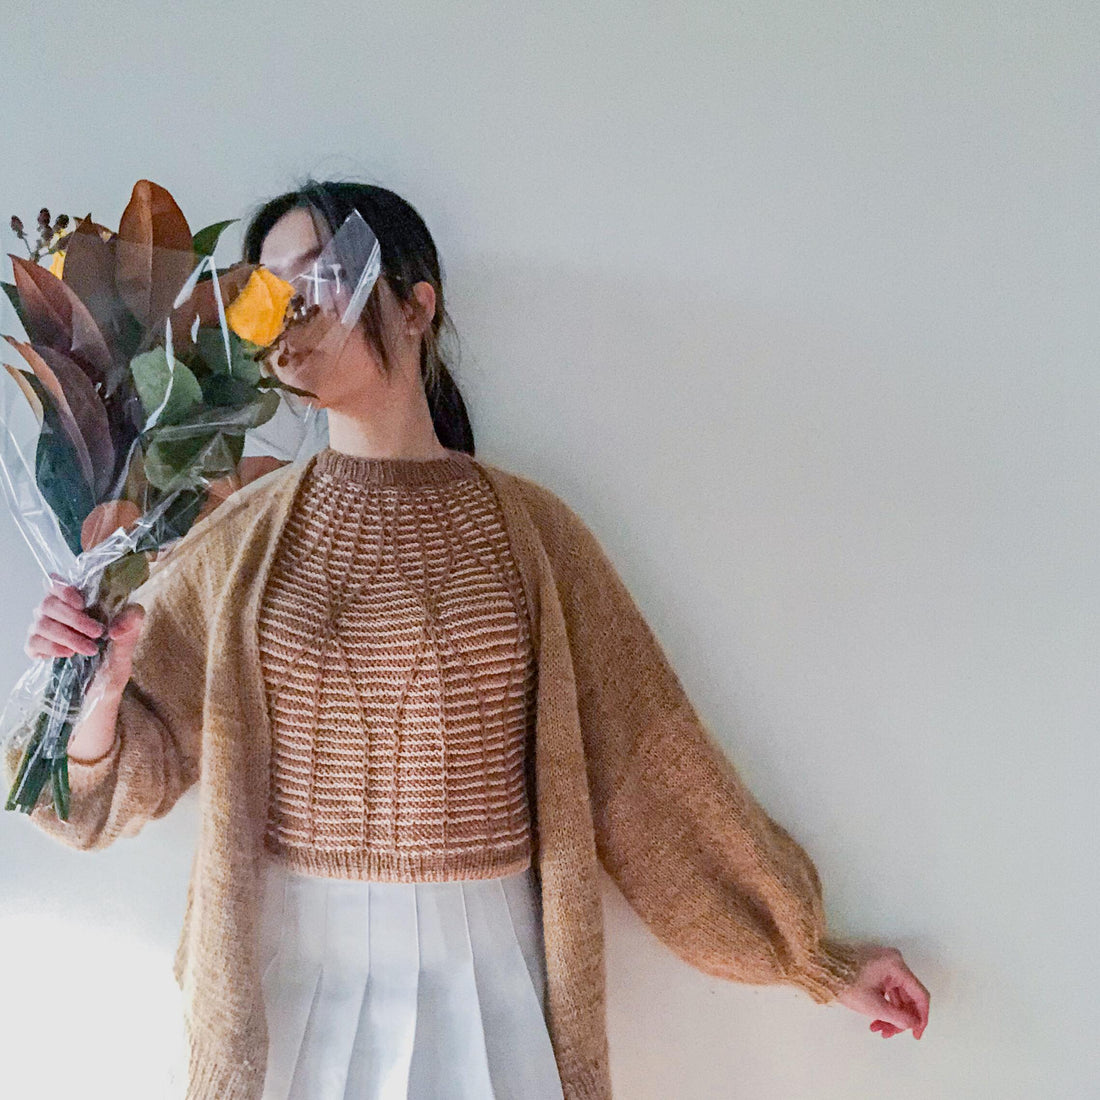 Focus on Teresa: A slow-fashion blogger who loves the power of Handmade